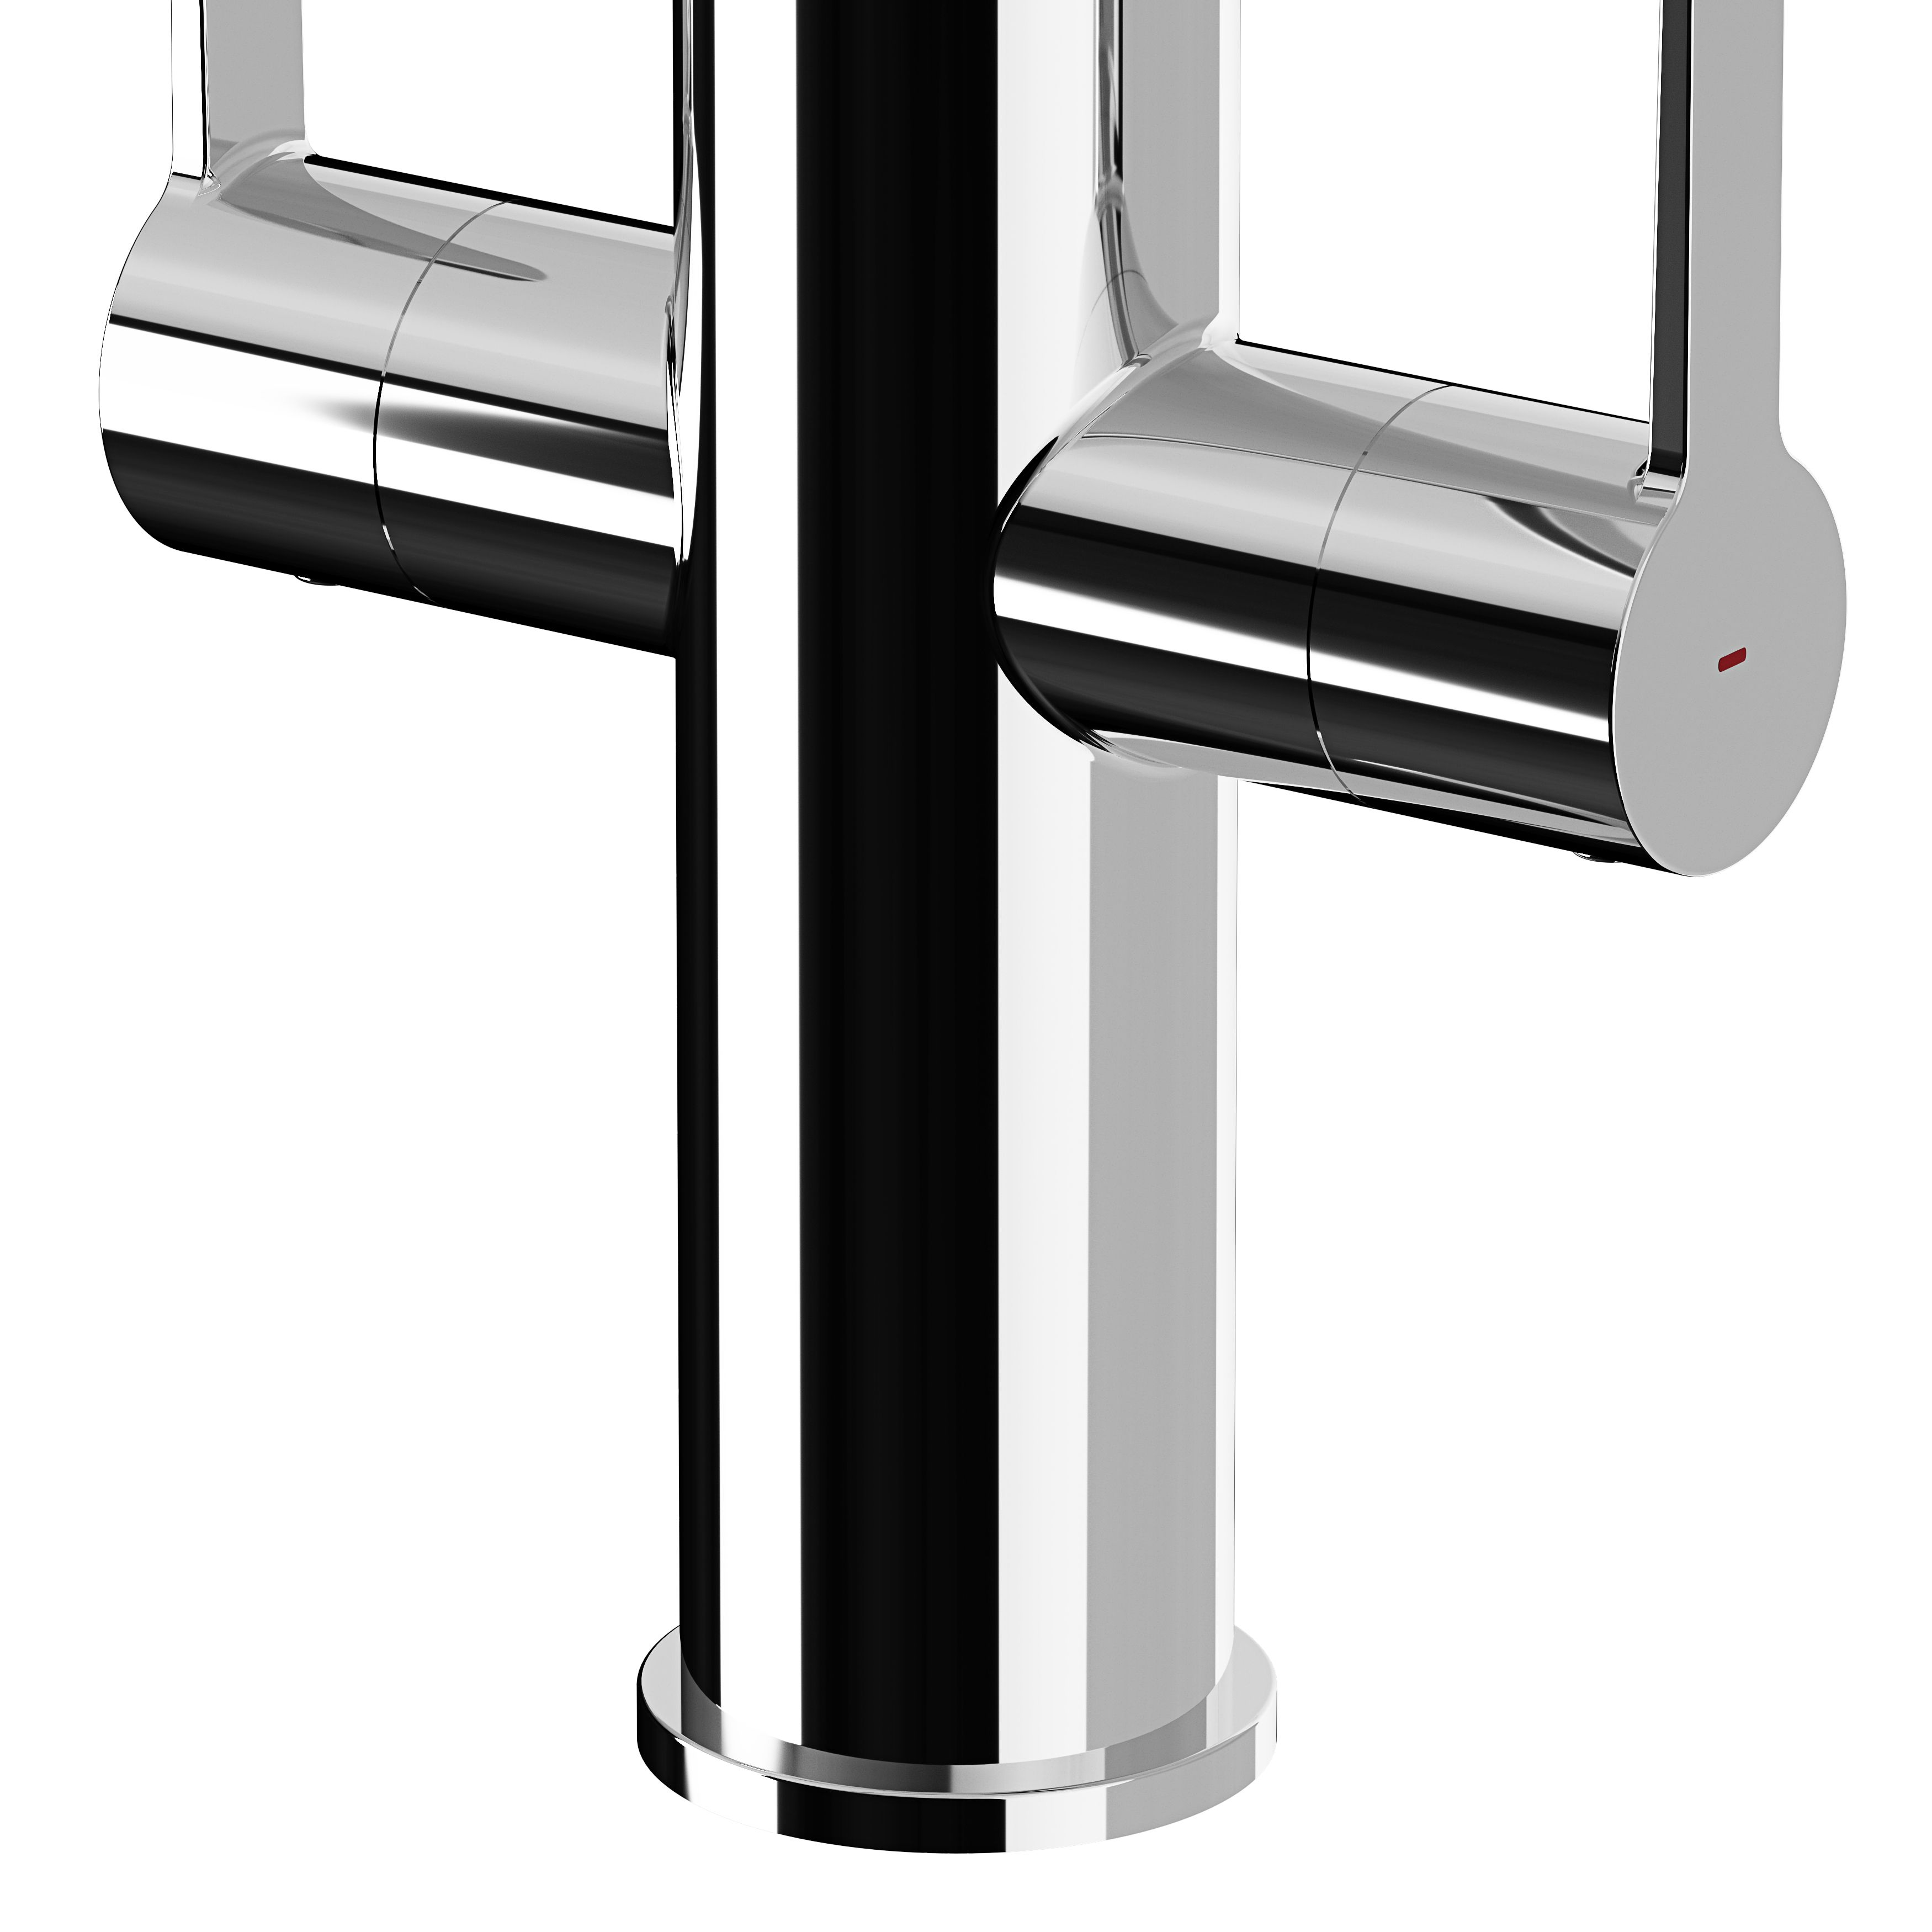 GoodHome Saffron Chrome-plated Twin lever Kitchen Spring neck Tap